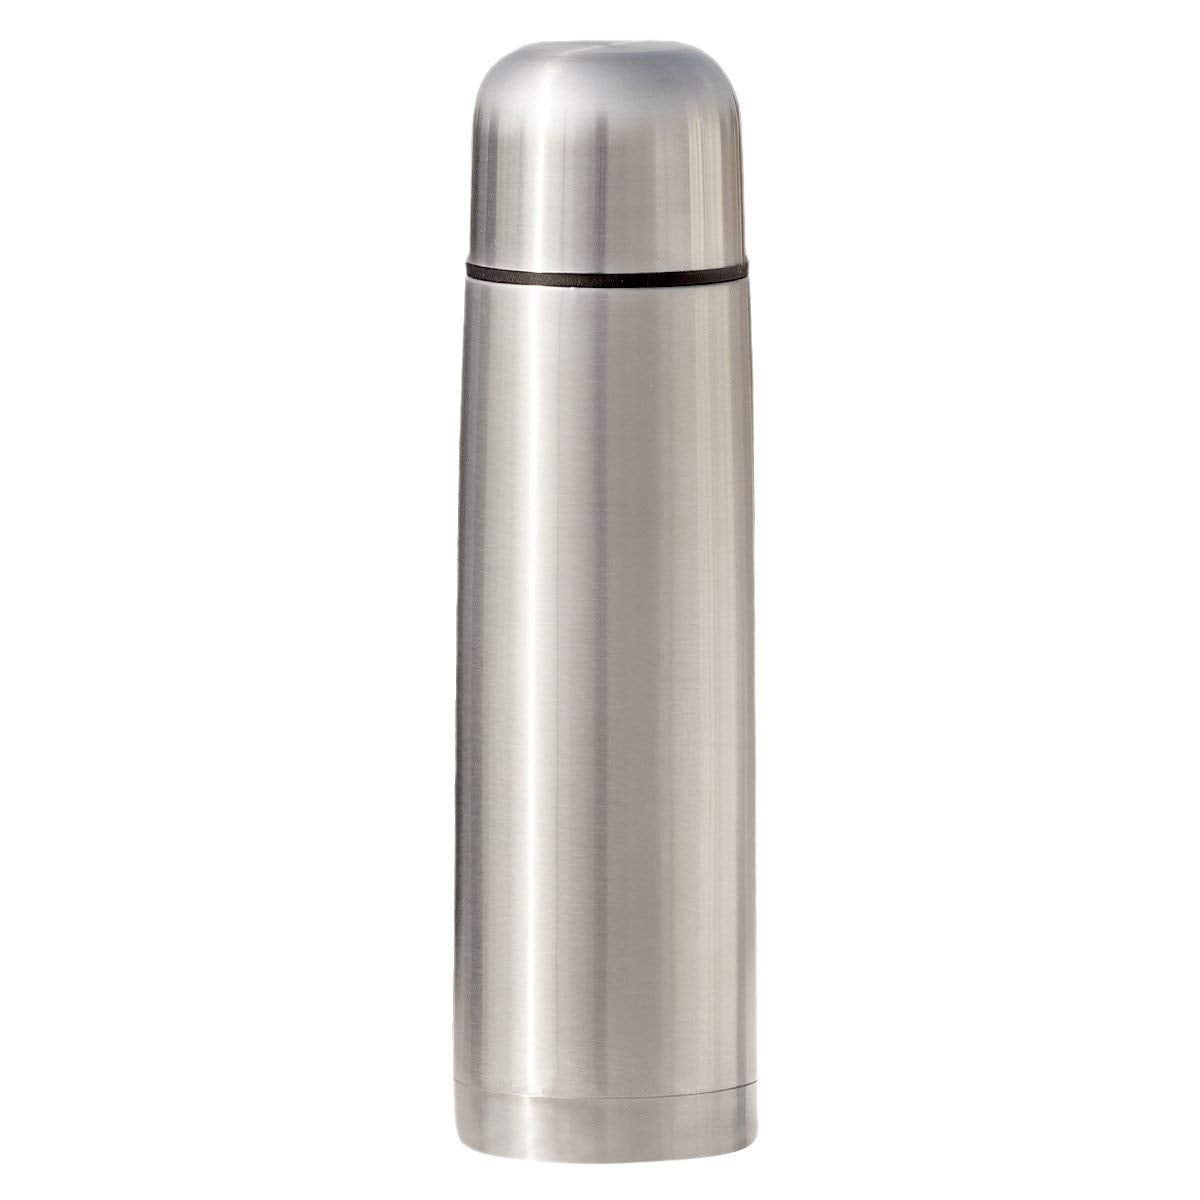 Insulated Thermos Cup Stainless Steel Water Coffee Tea Drink Outdoor Travel Mug 